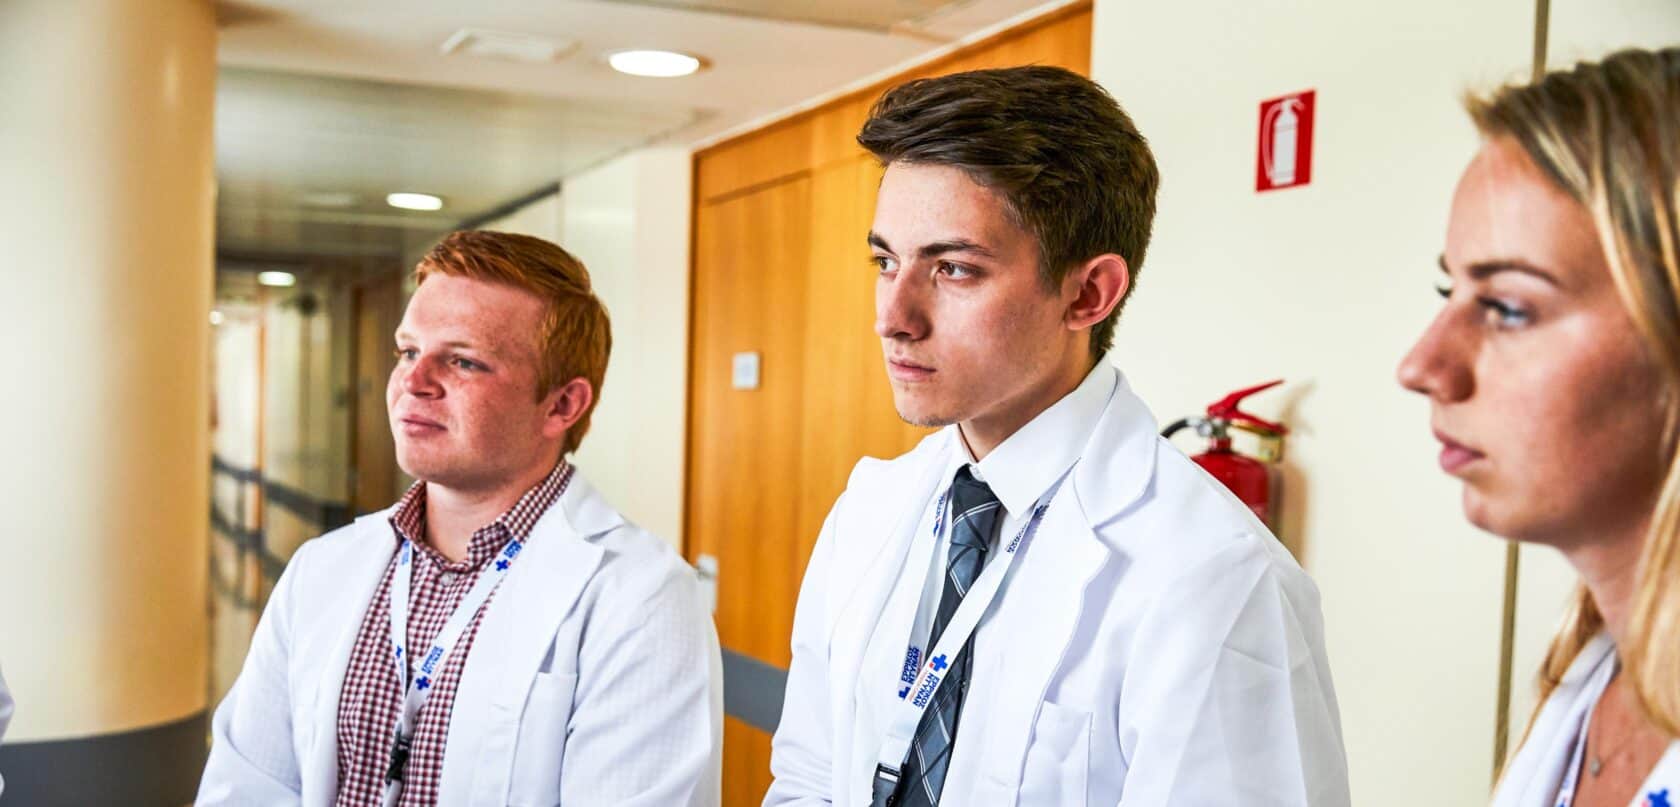 Students listening intently while shadowing in a hospital.